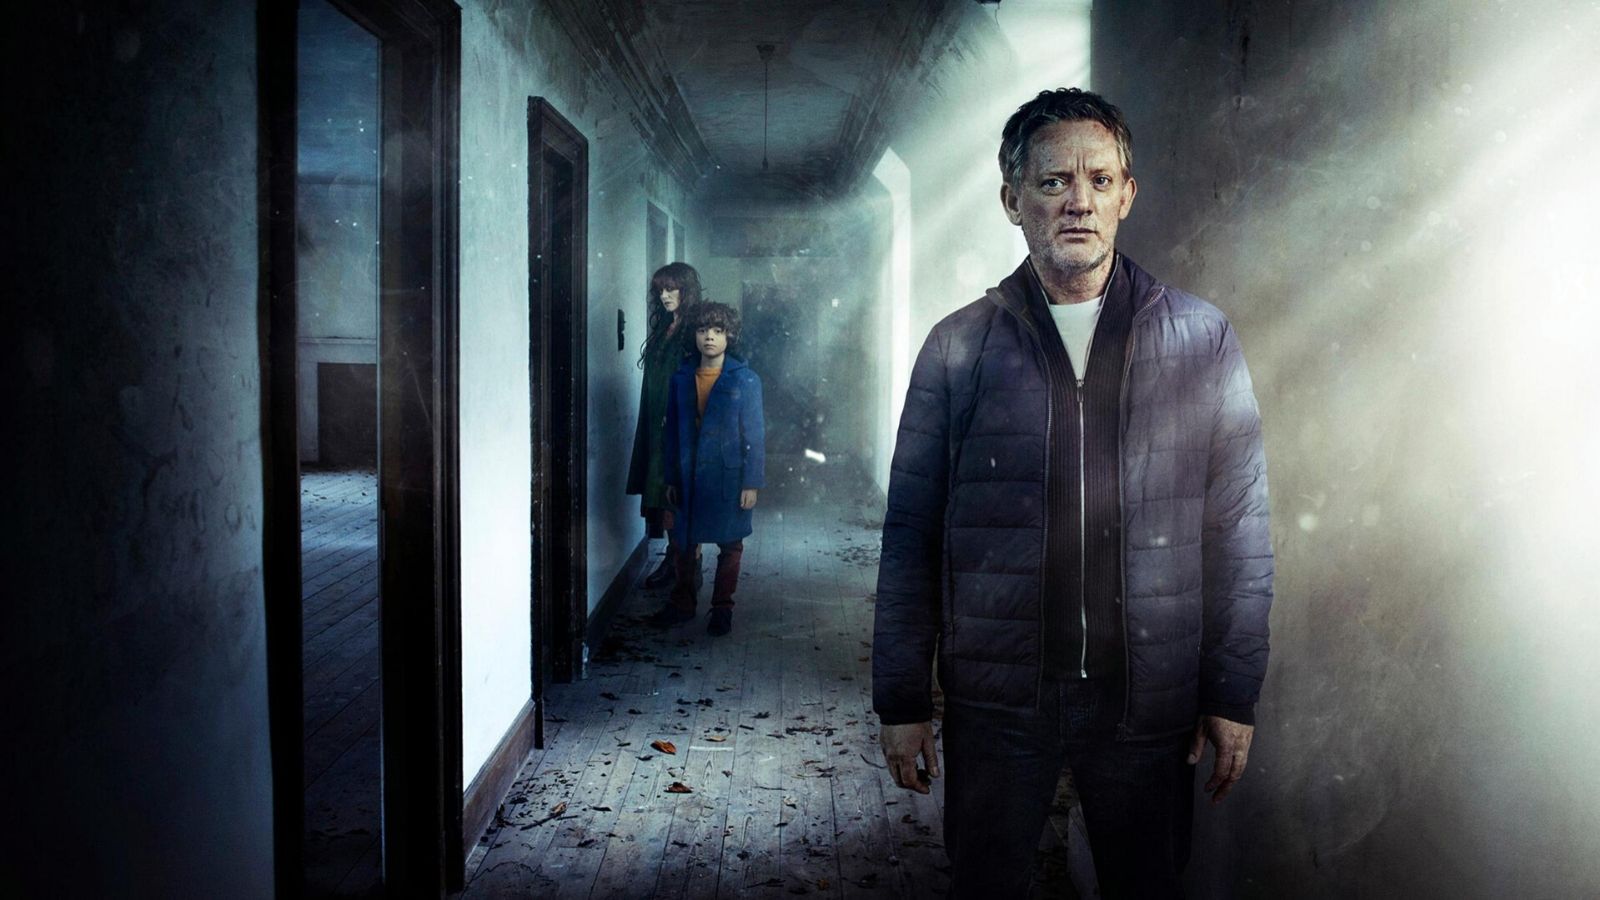 Douglas Henshall stands in a spooky hallway, with a woman and her son in the background